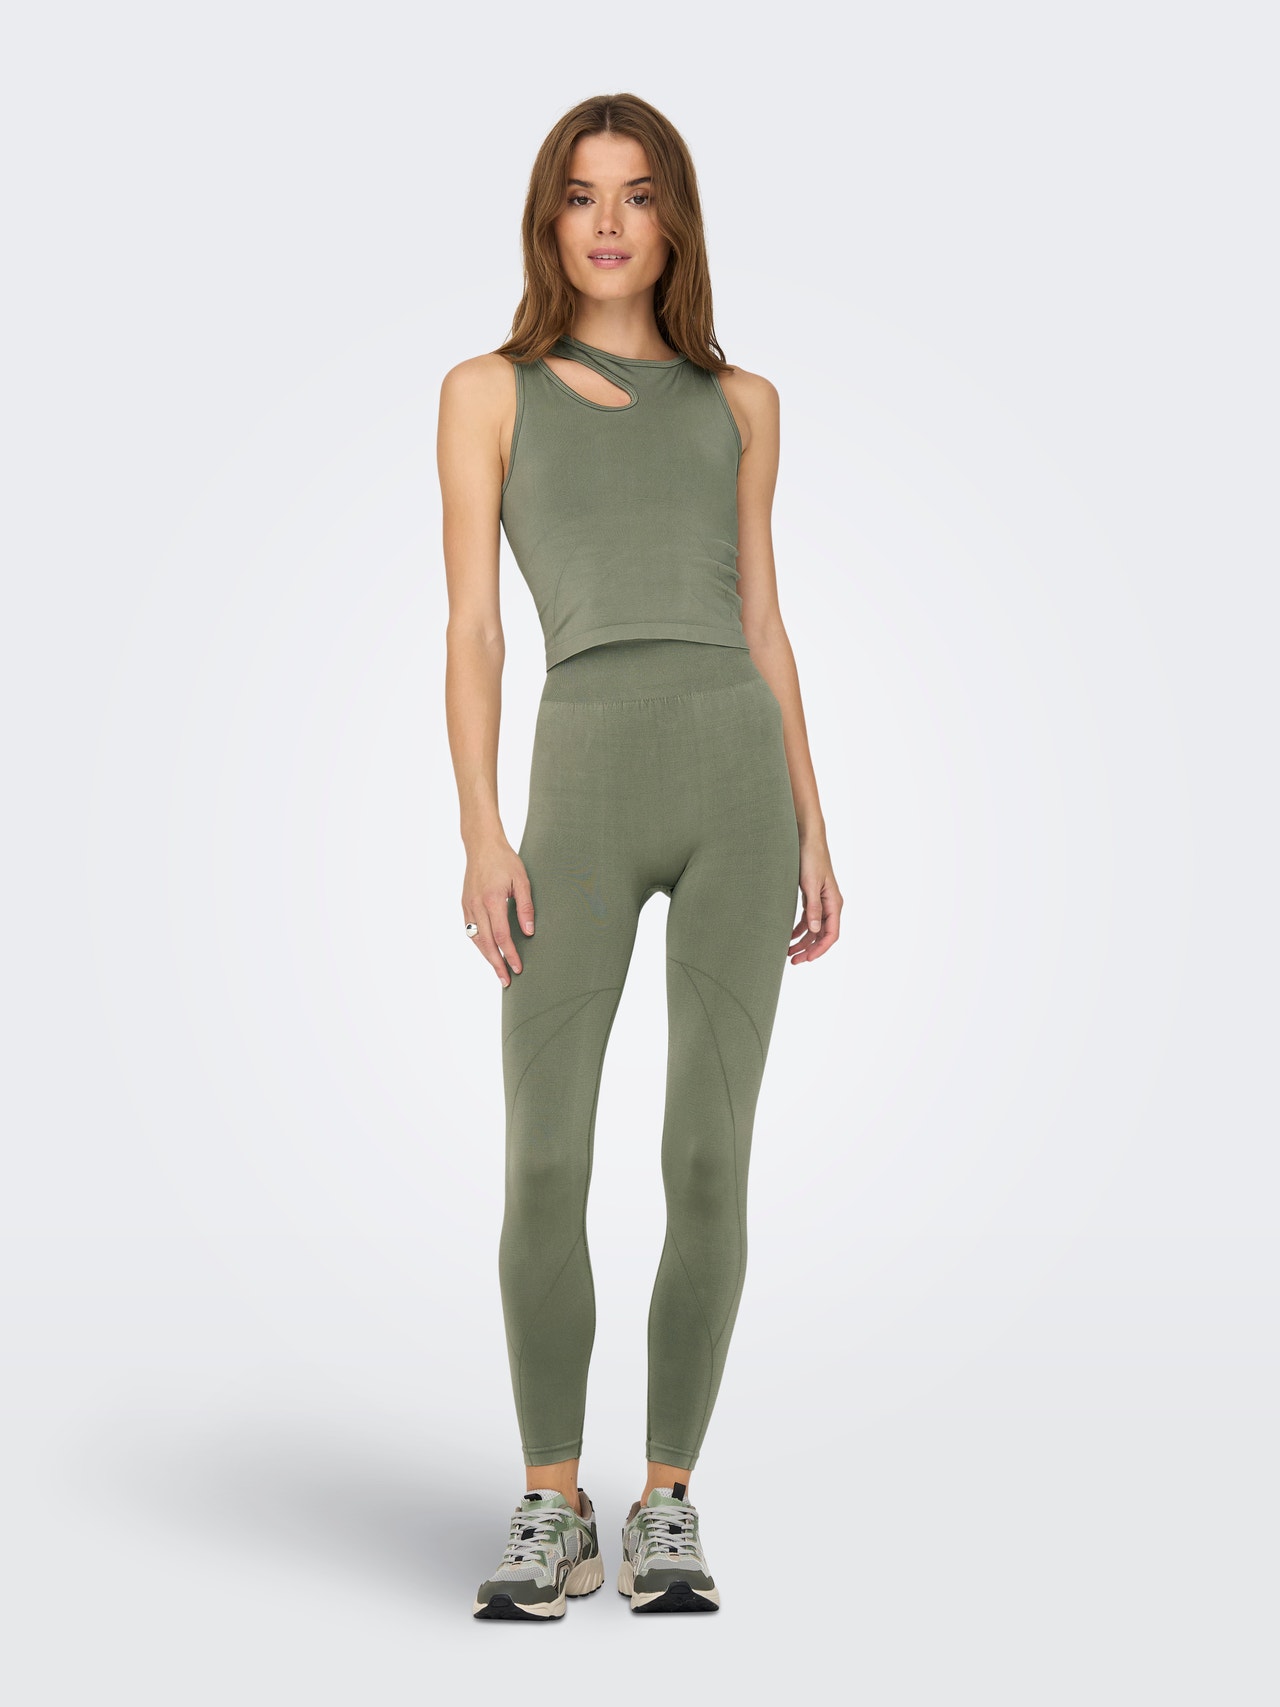 ONLY Tight Fit High waist Leggings -Dusty Olive - 15296999